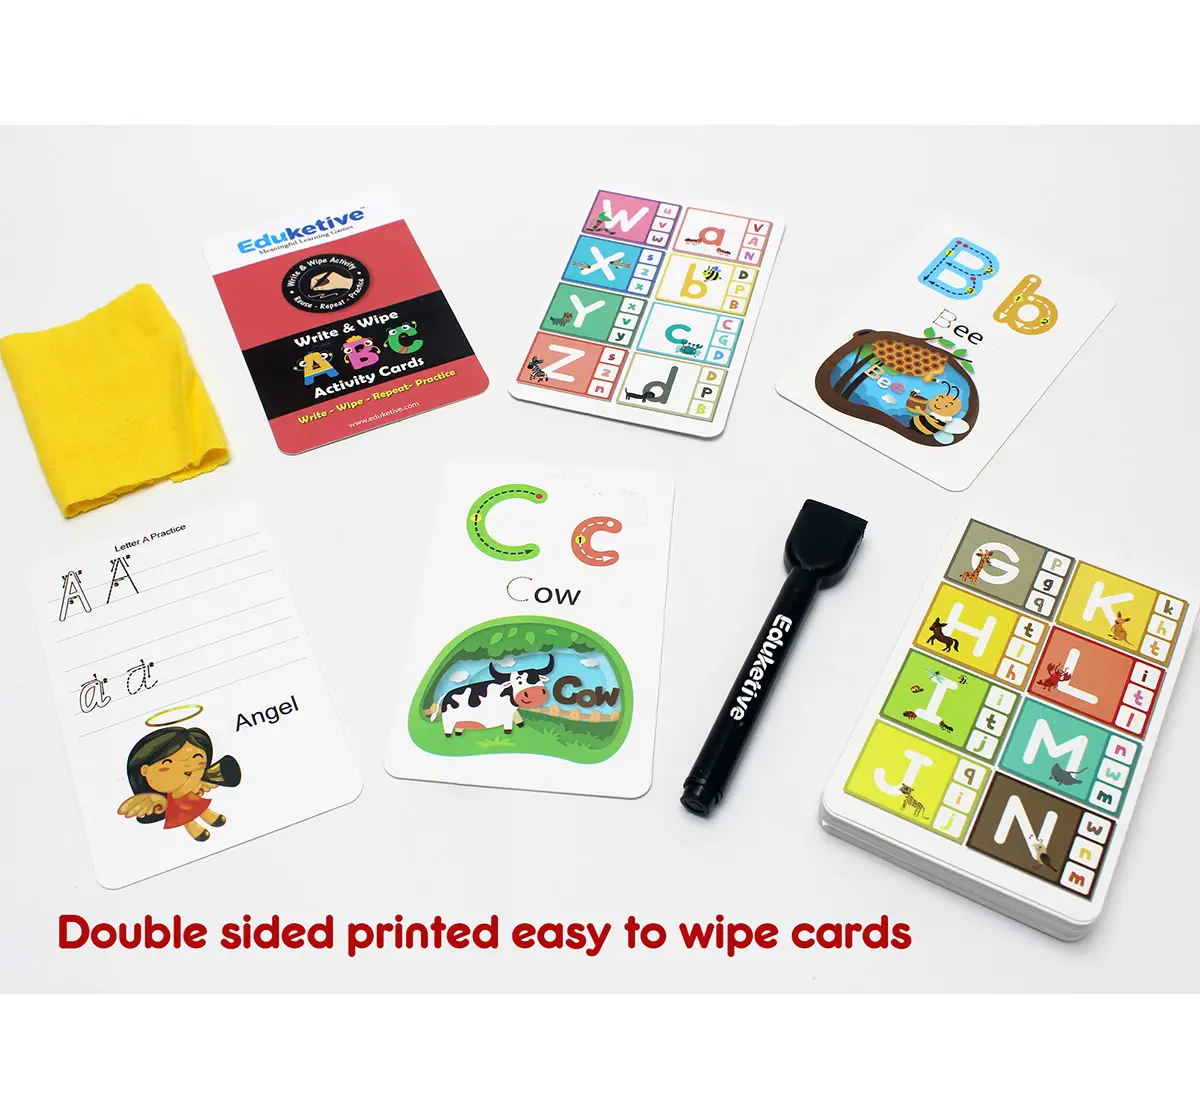 Eduketive ABC Letters Write & Wipe Reusable Activity 3-6 yrs Writing Practice Preschool Learning Educational Game with Exercise Book